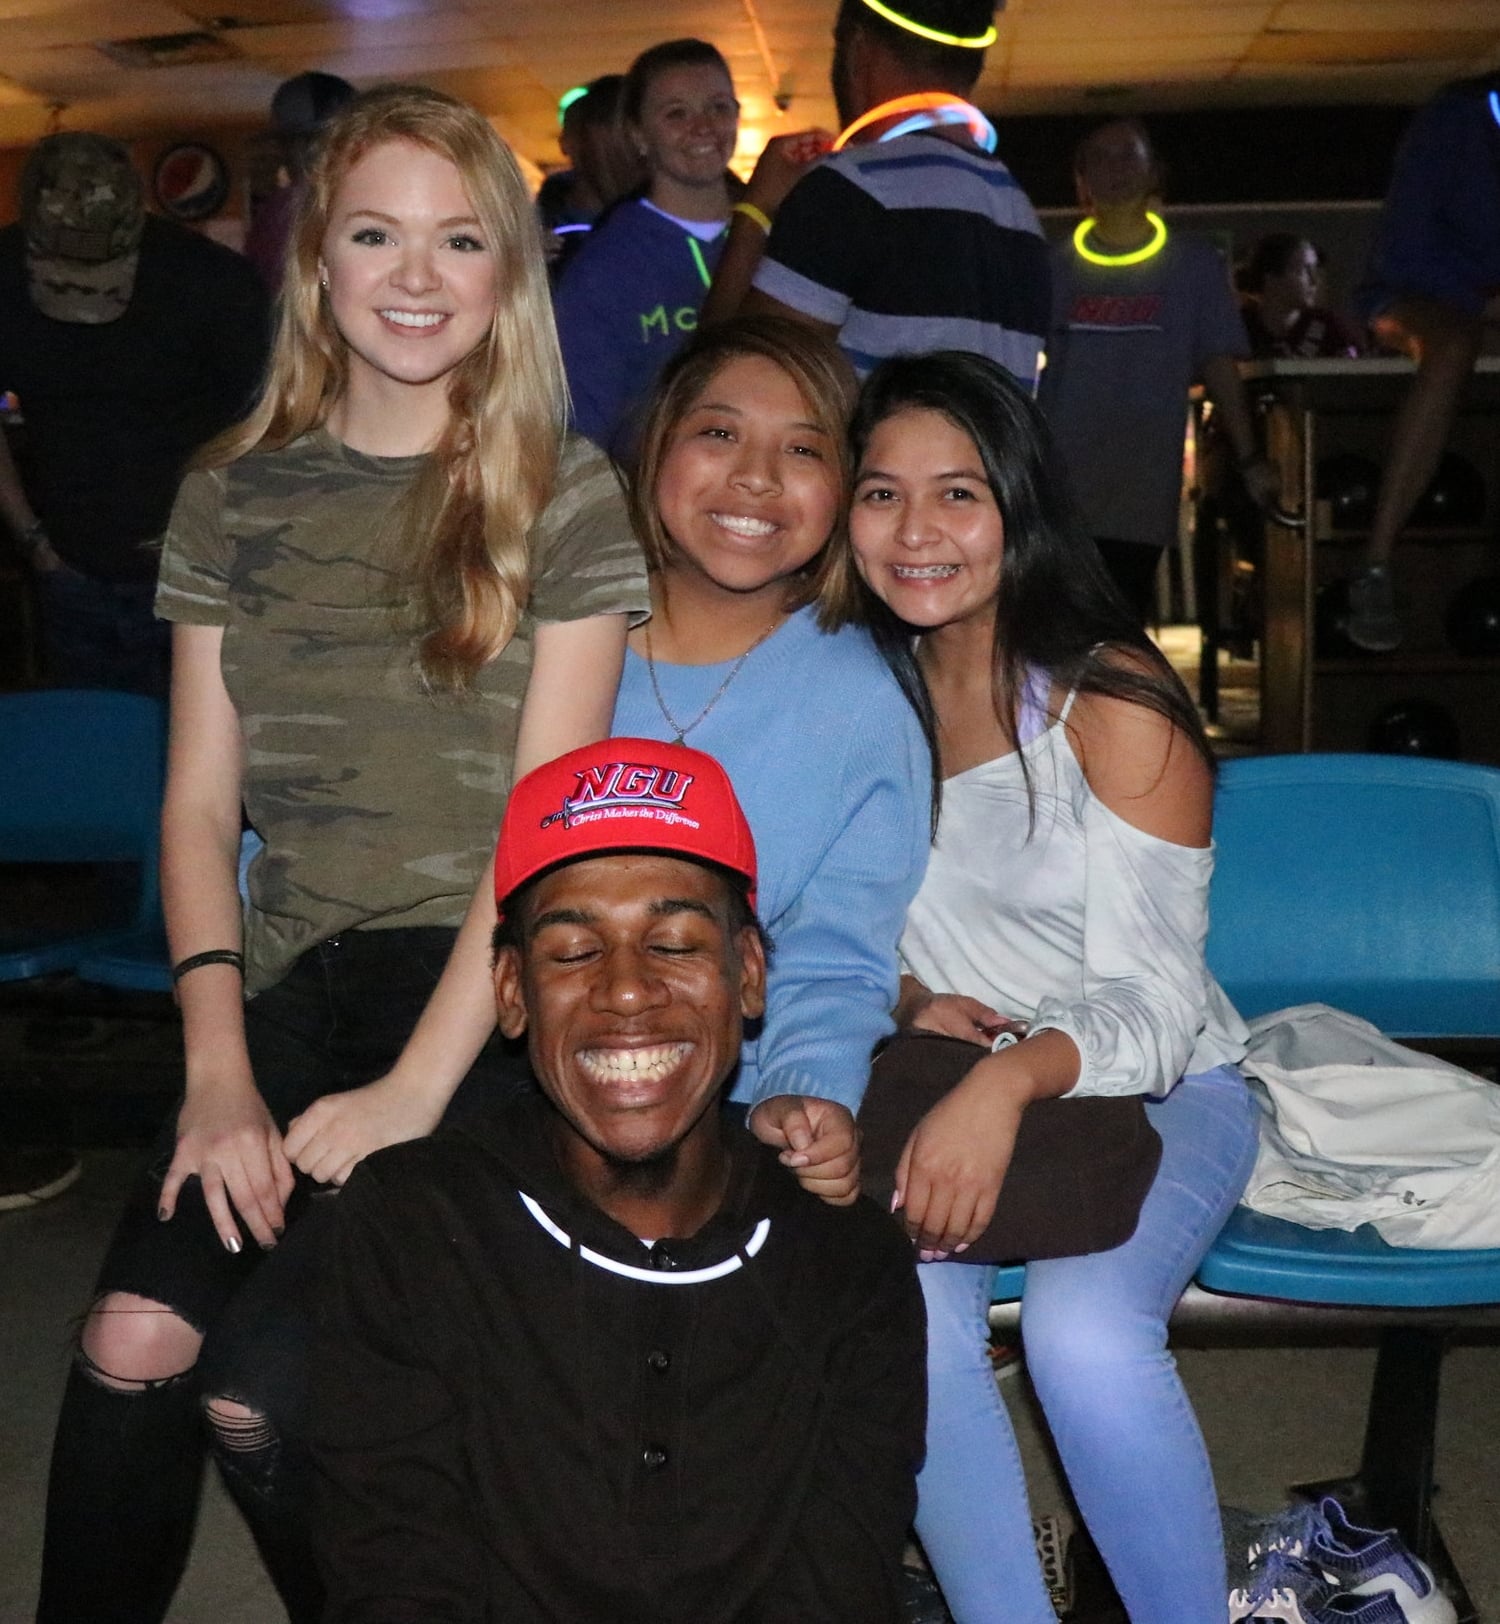 Sophomore, Taylor Loughry, freshman, Tabita Romero, and sophomores Mary Garcia and Zion Dendy all take a break from having fun to pose for the camera.